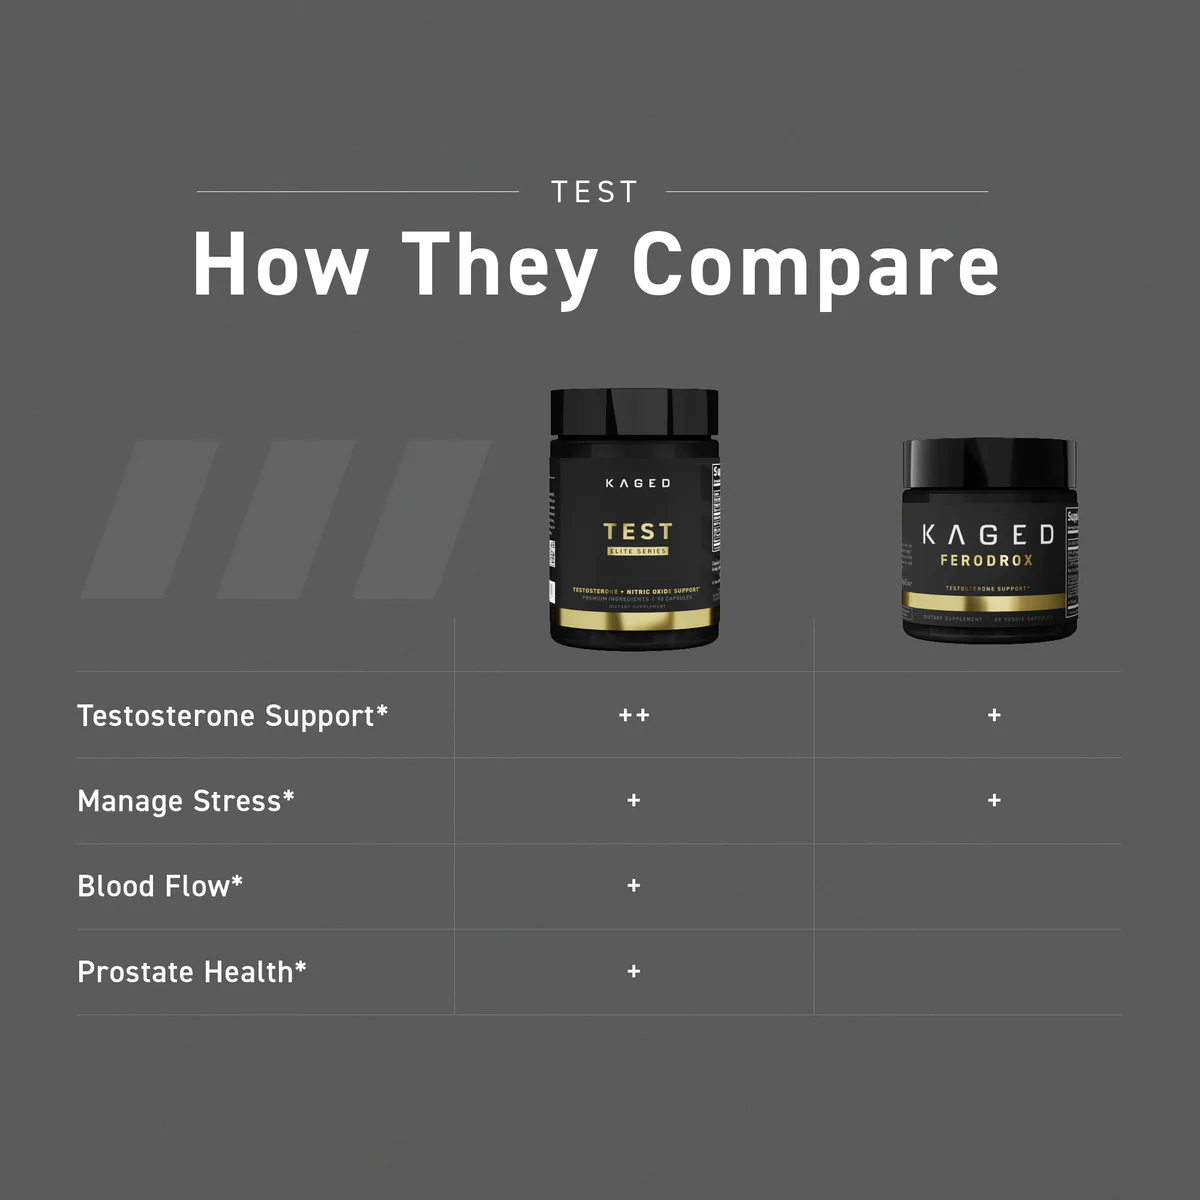 Kaged Test Product Comparison Chart